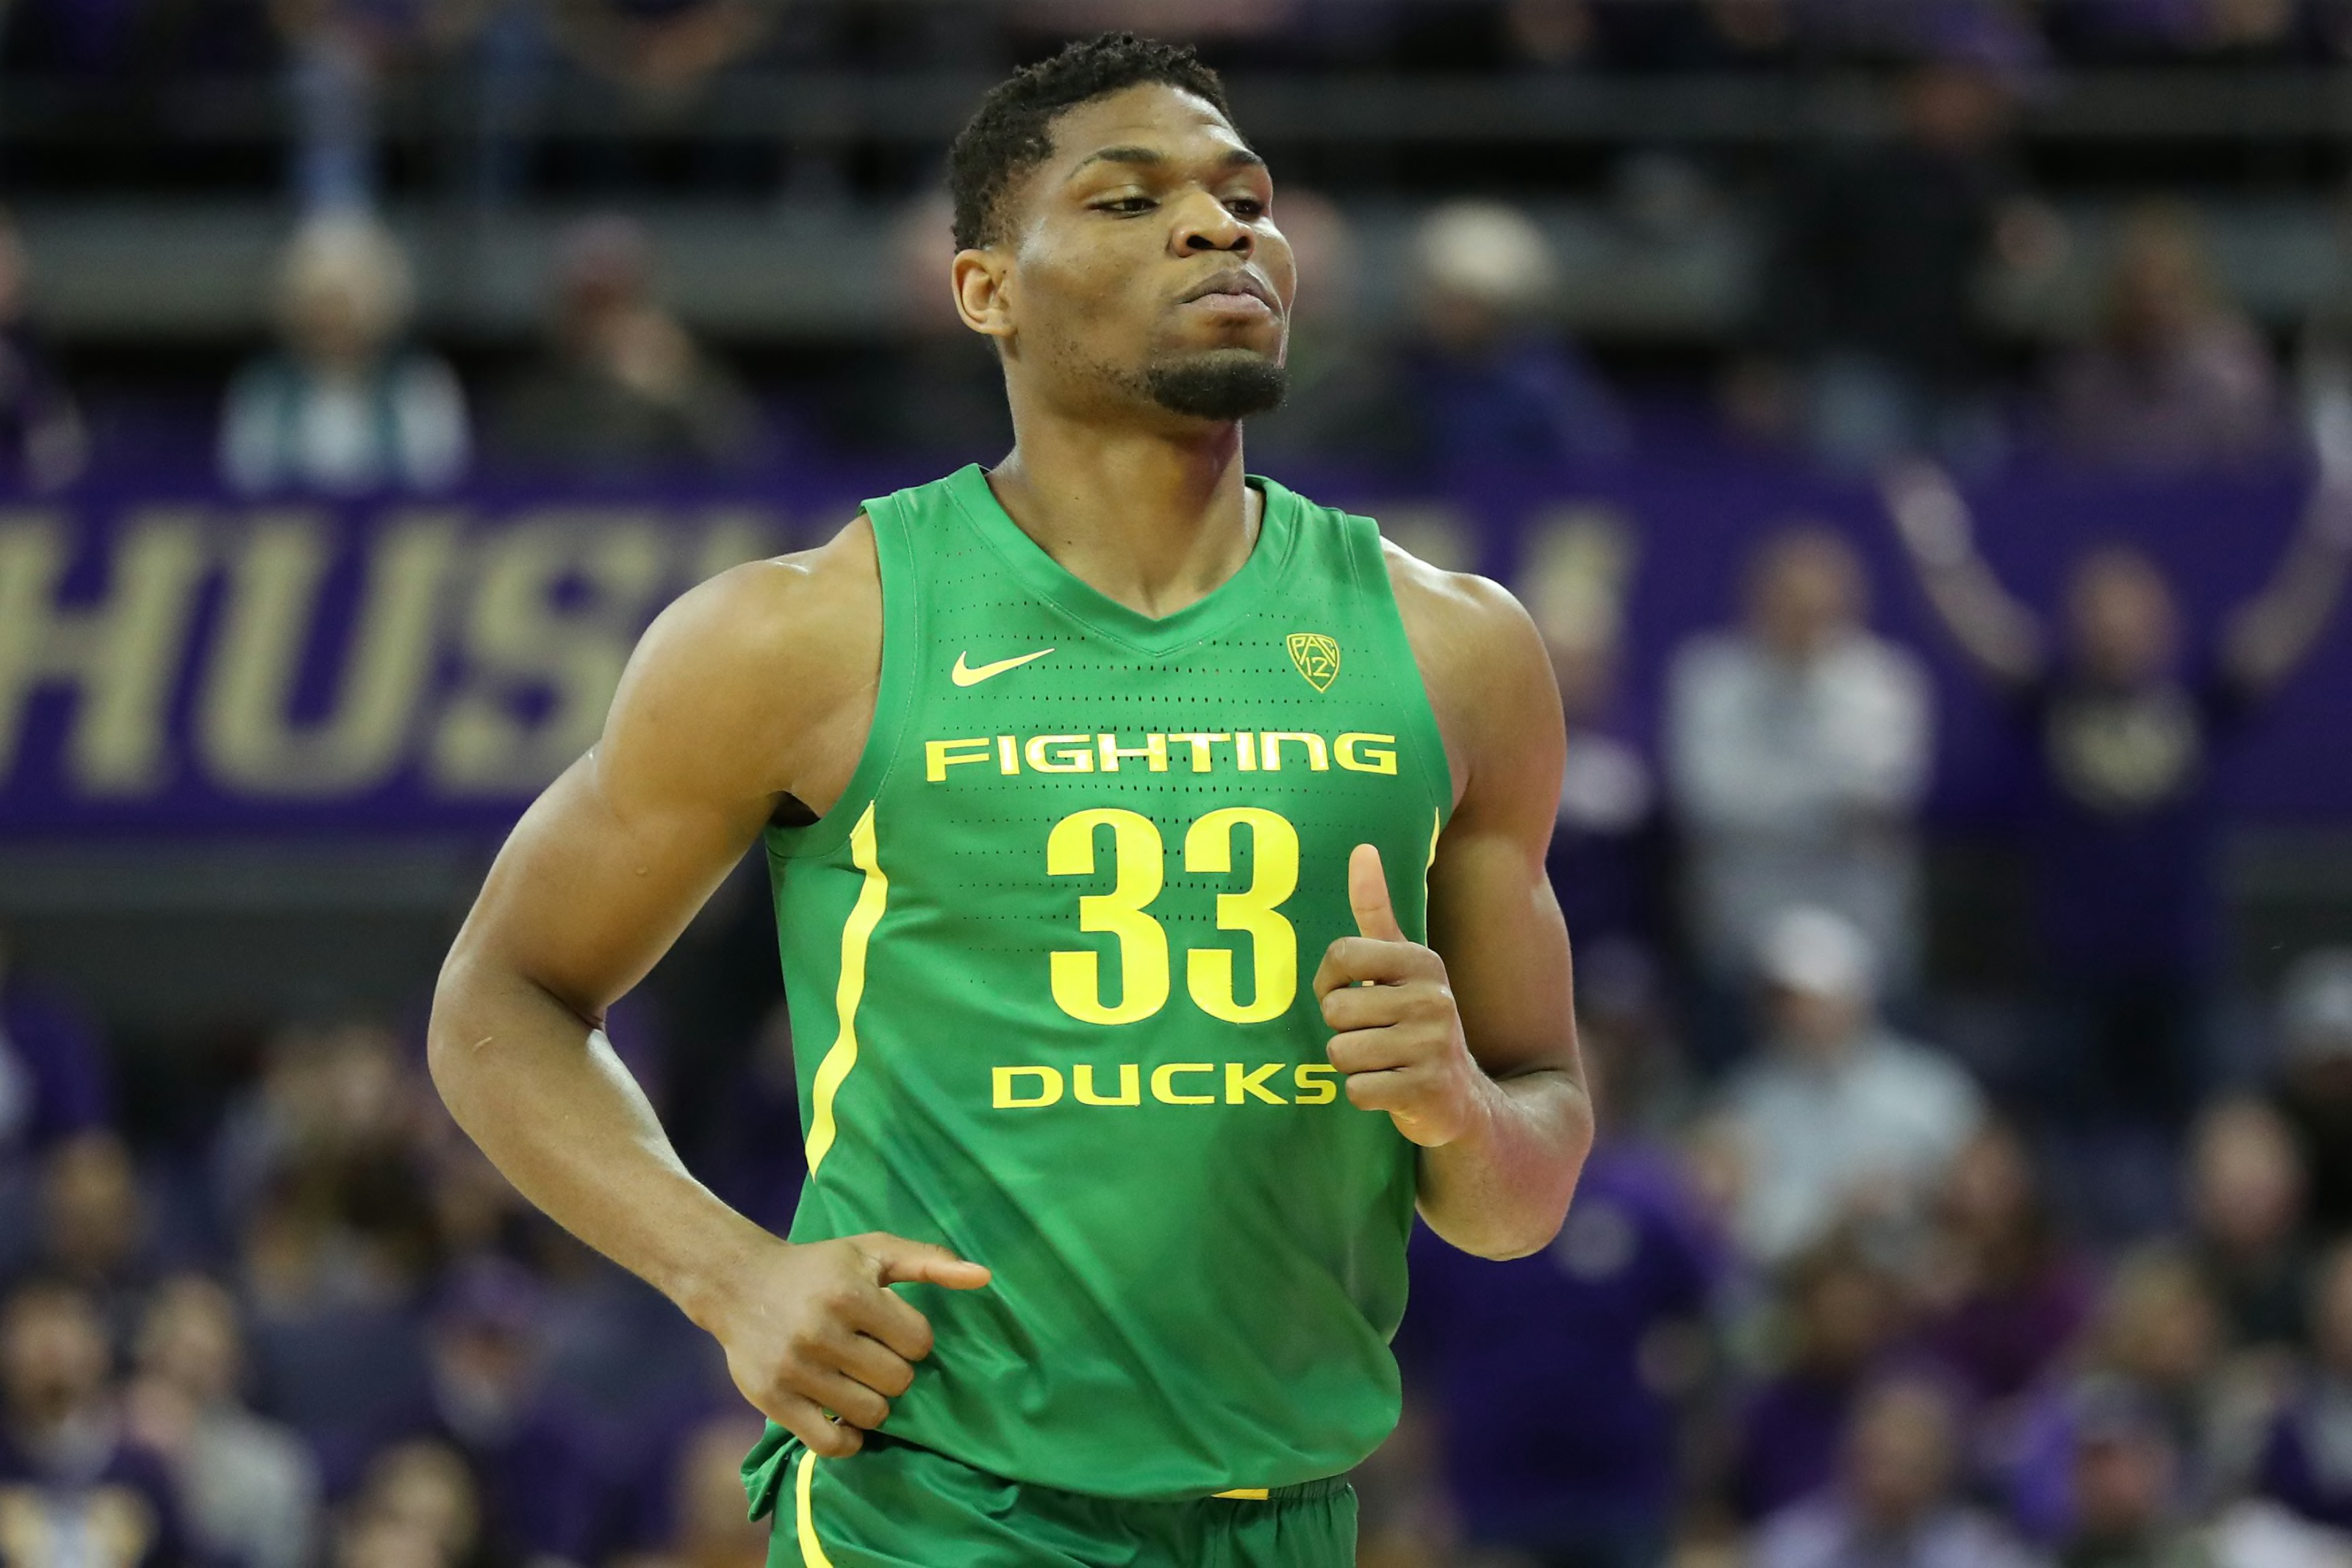 Why Oregon can have 'Fighting Ducks' on basketball jerseys, while